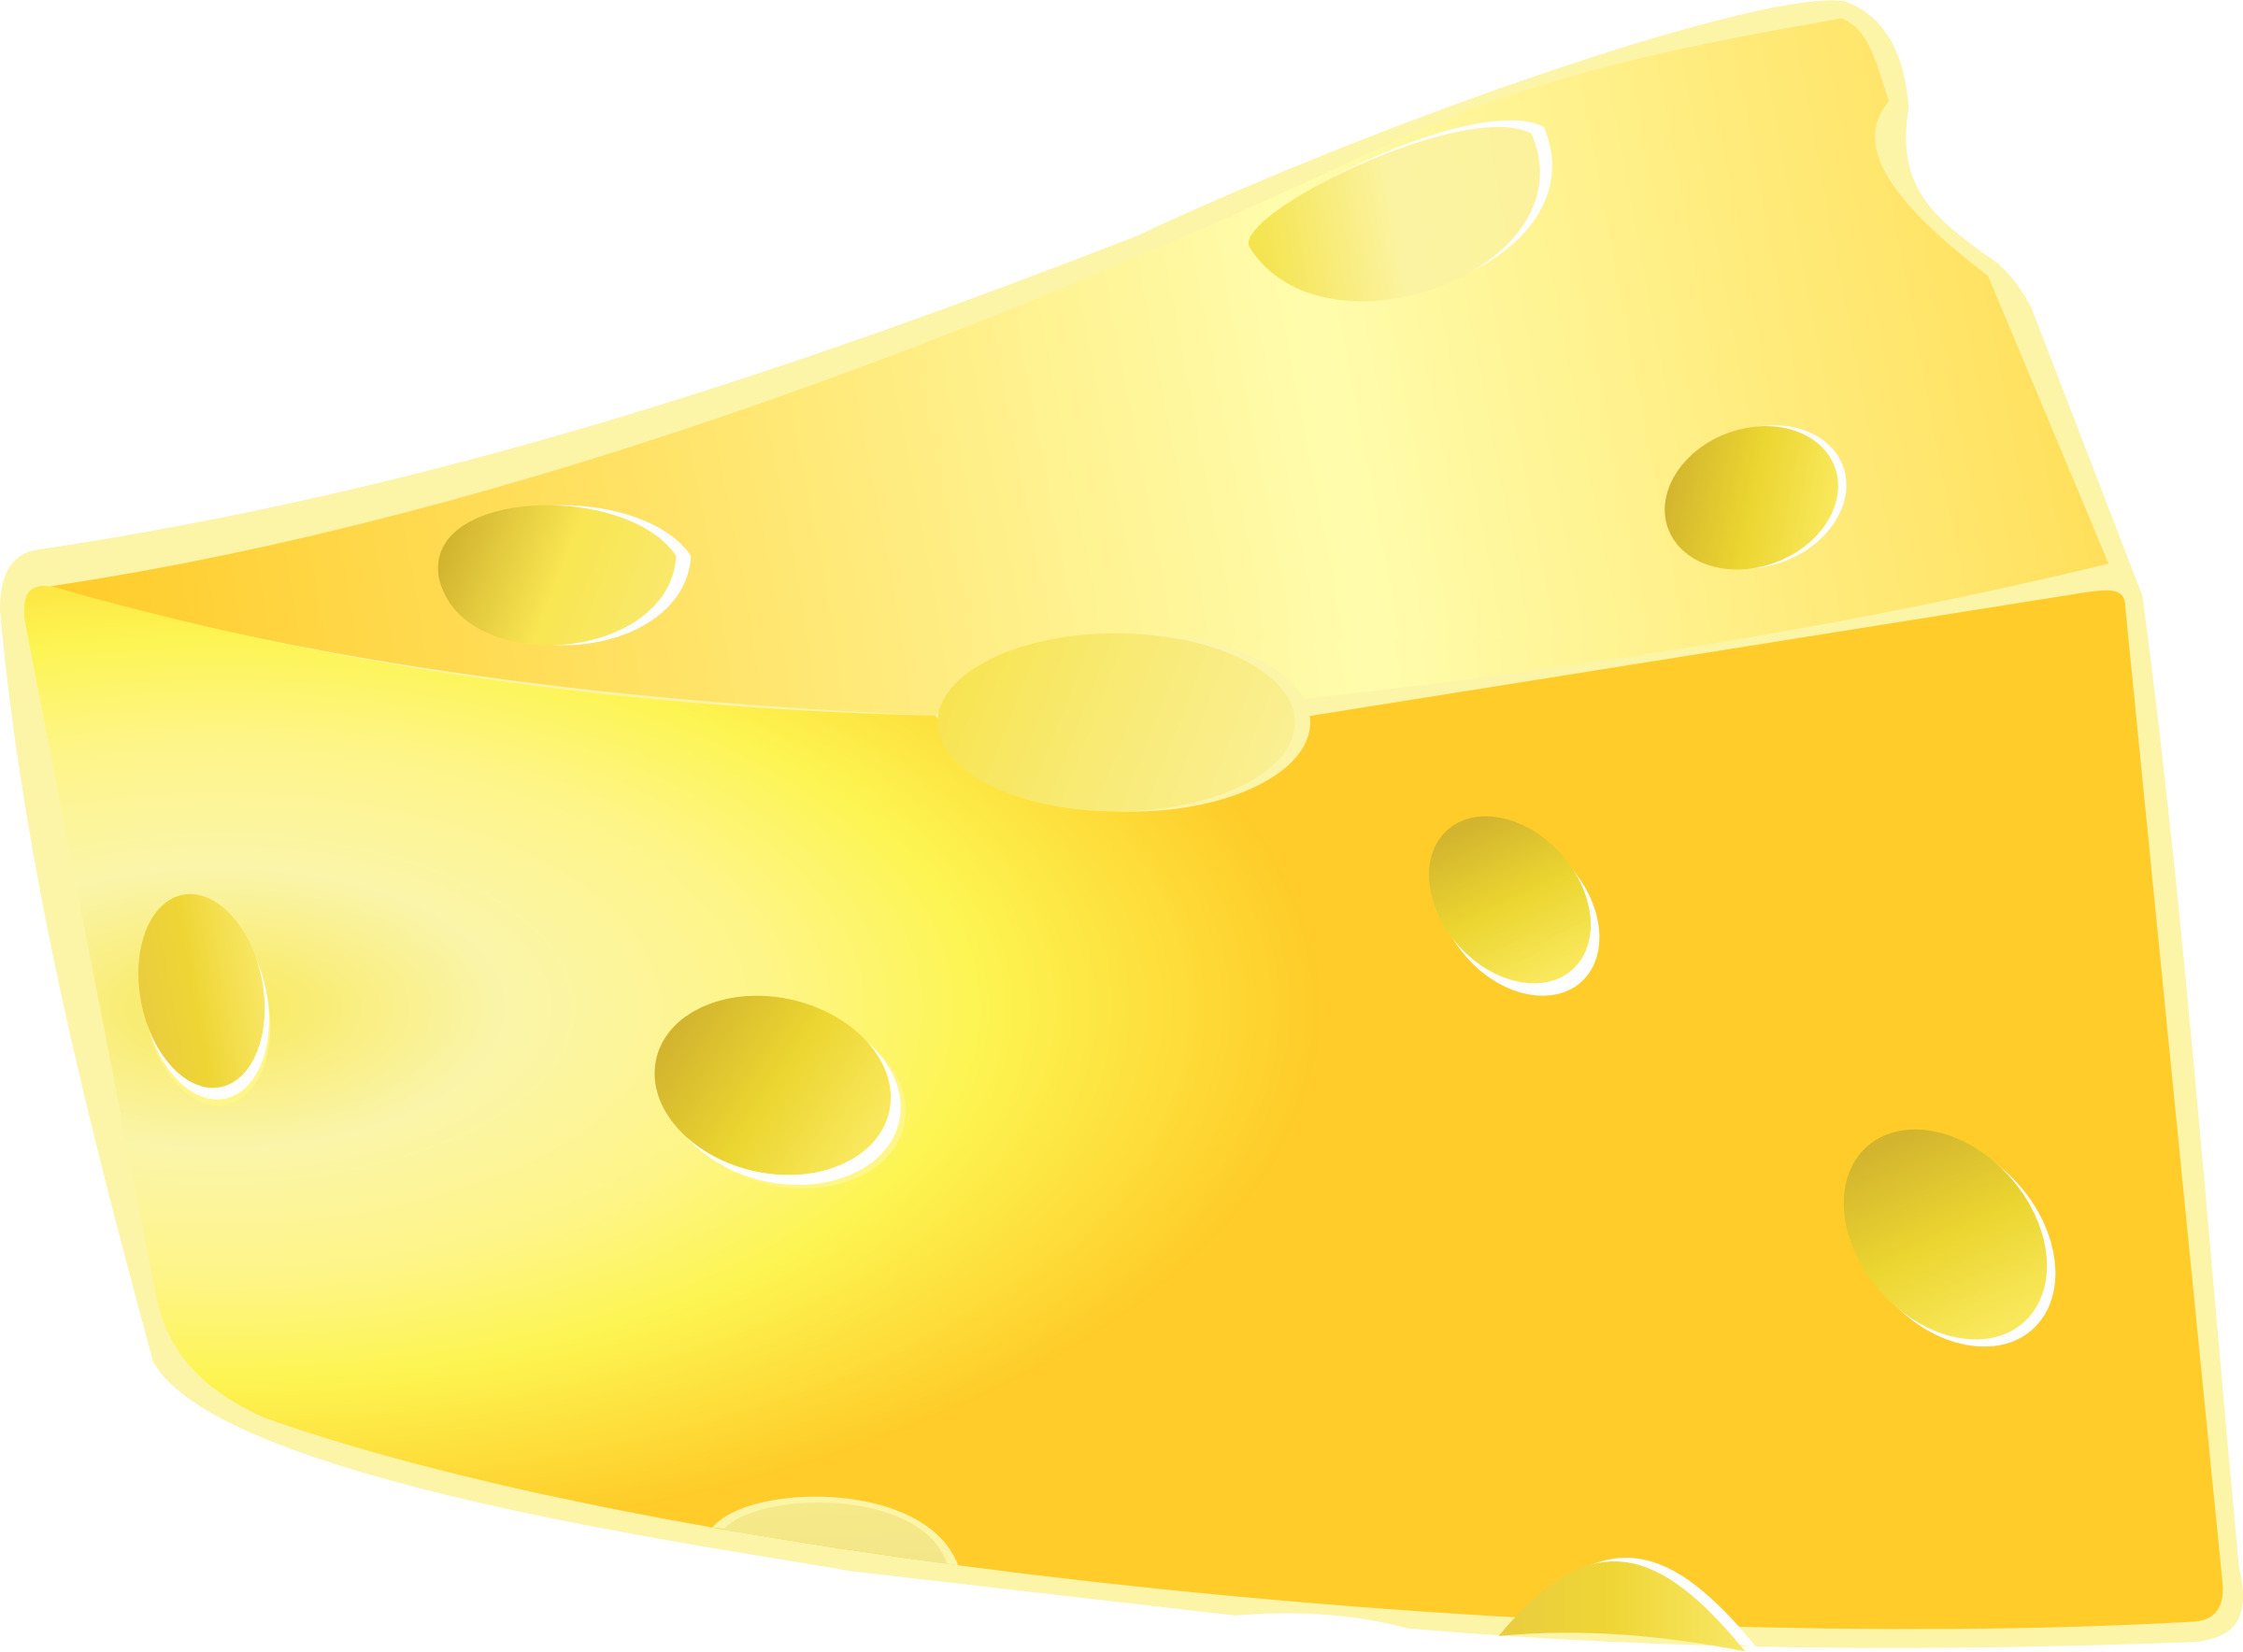 Cheese clip art free clipart images 4